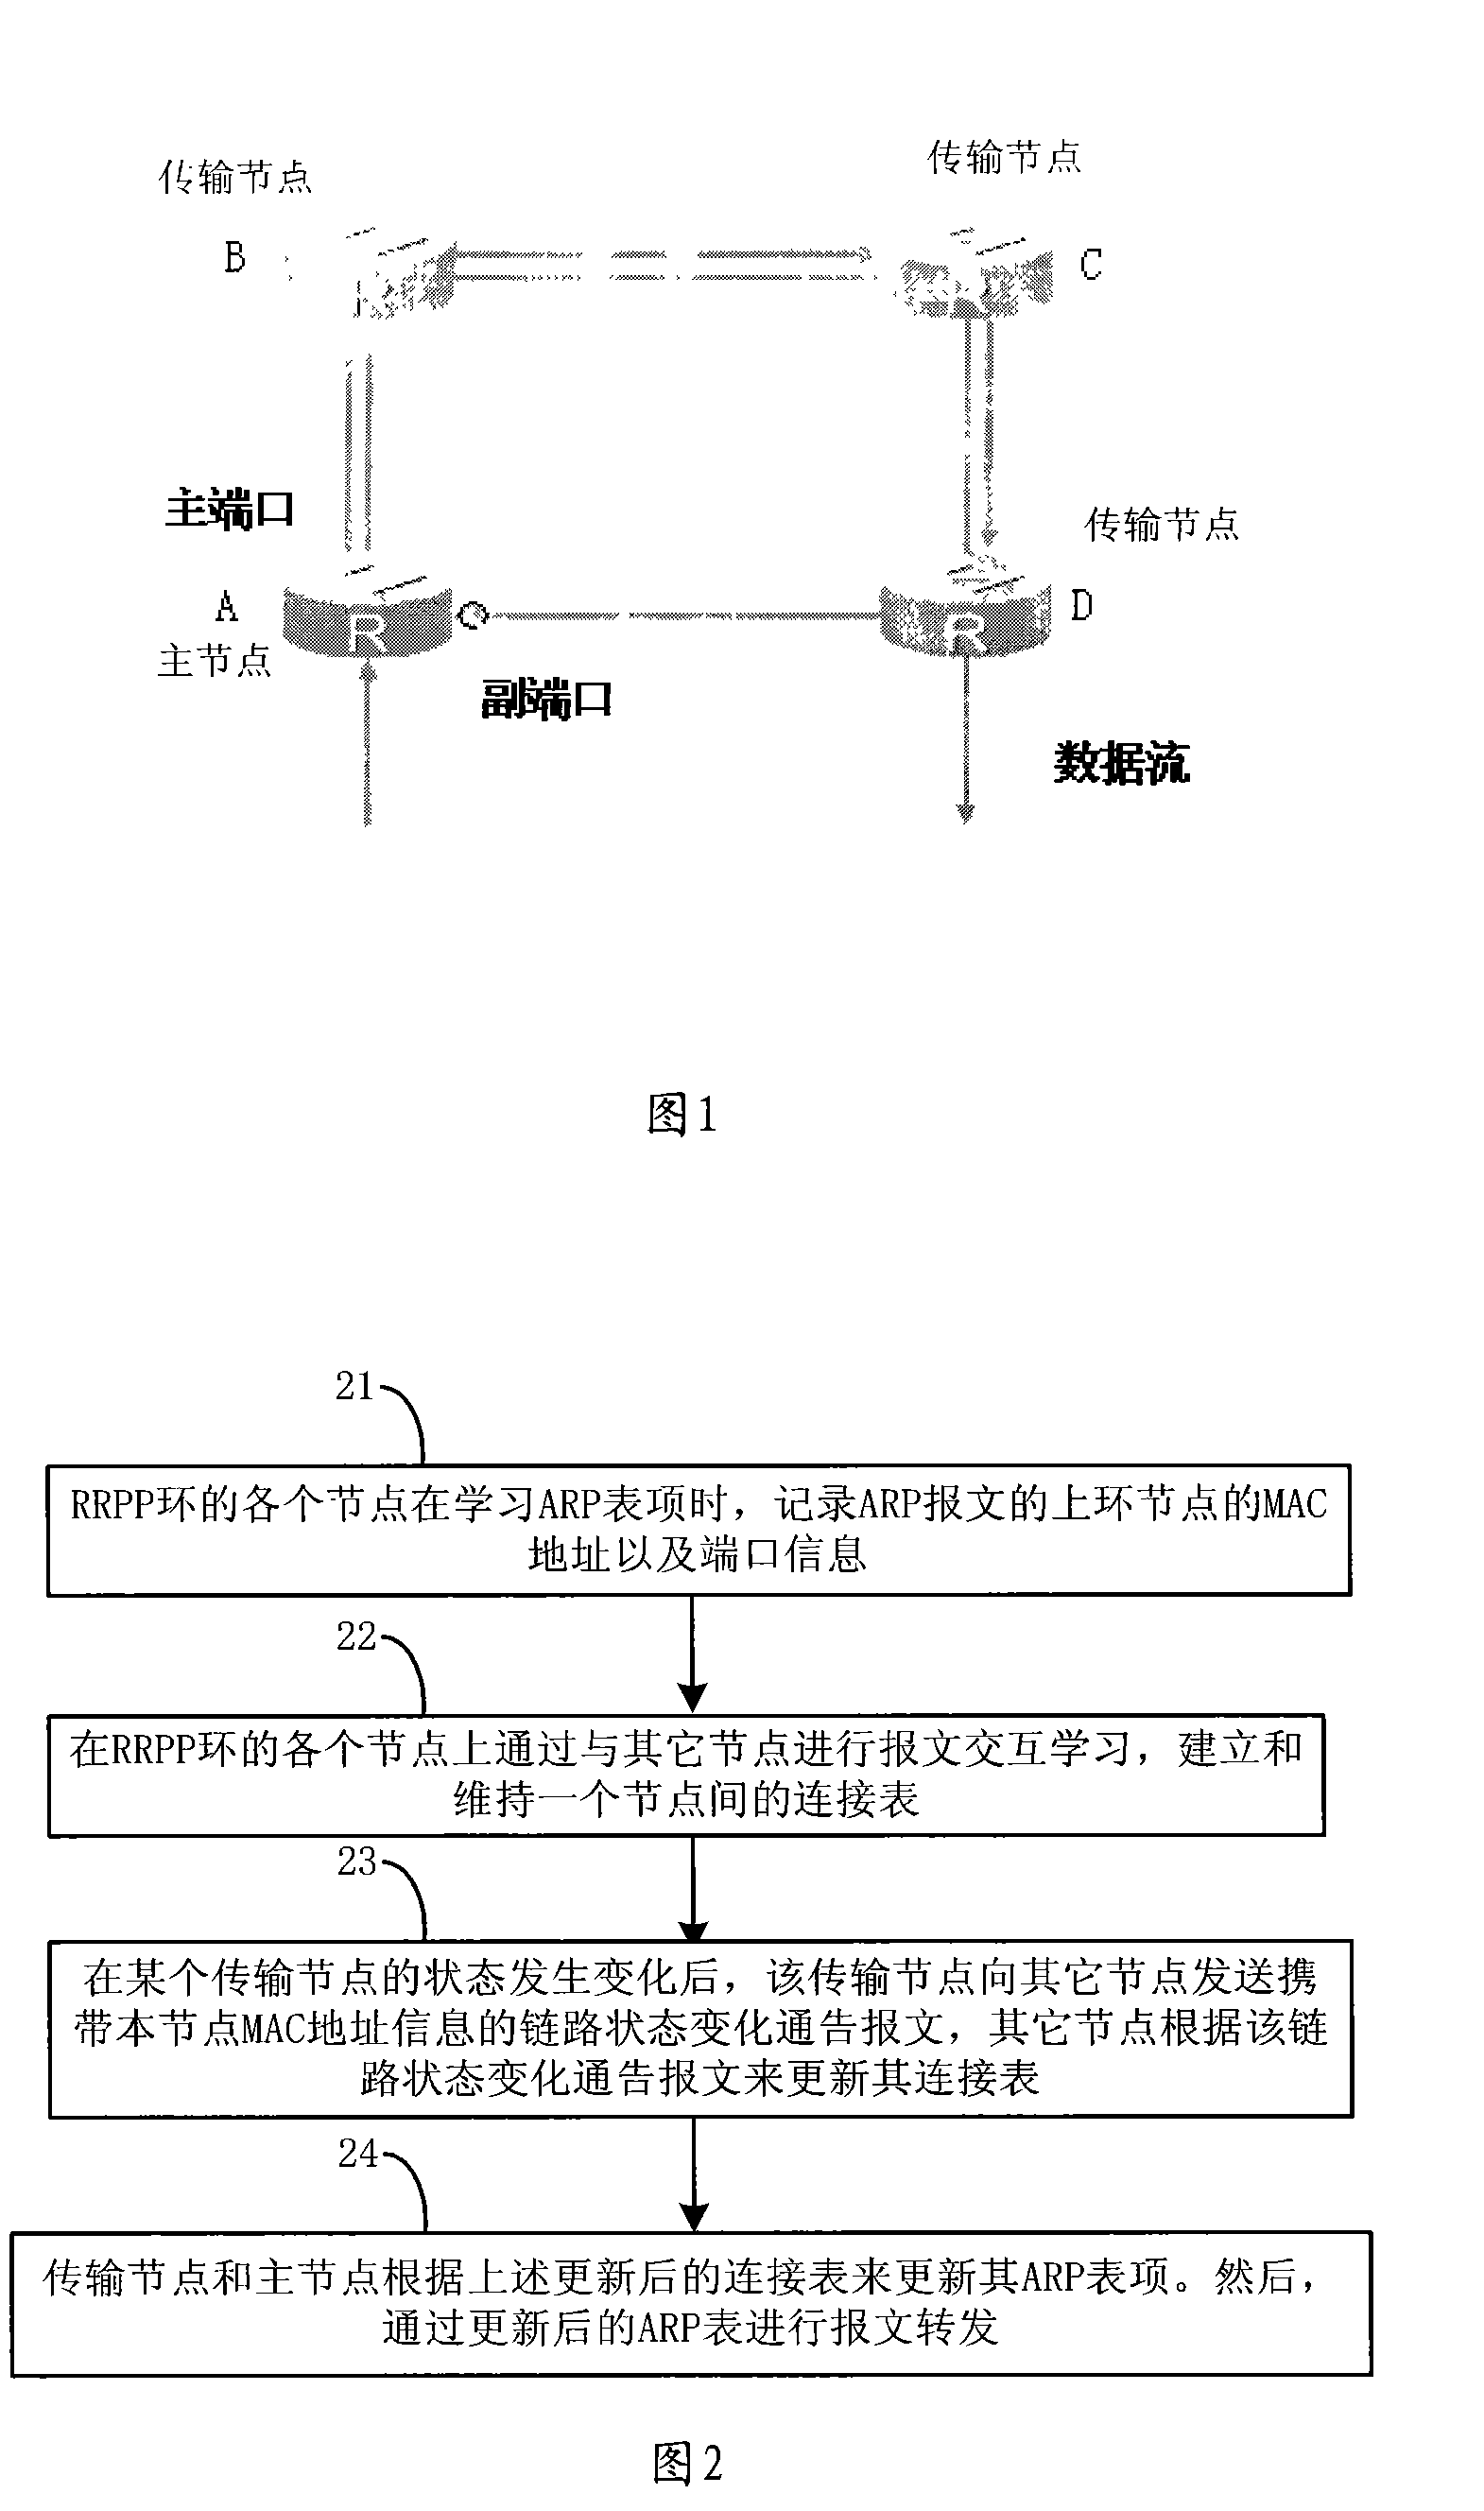 Method and apparatus for switching traffic of looped network